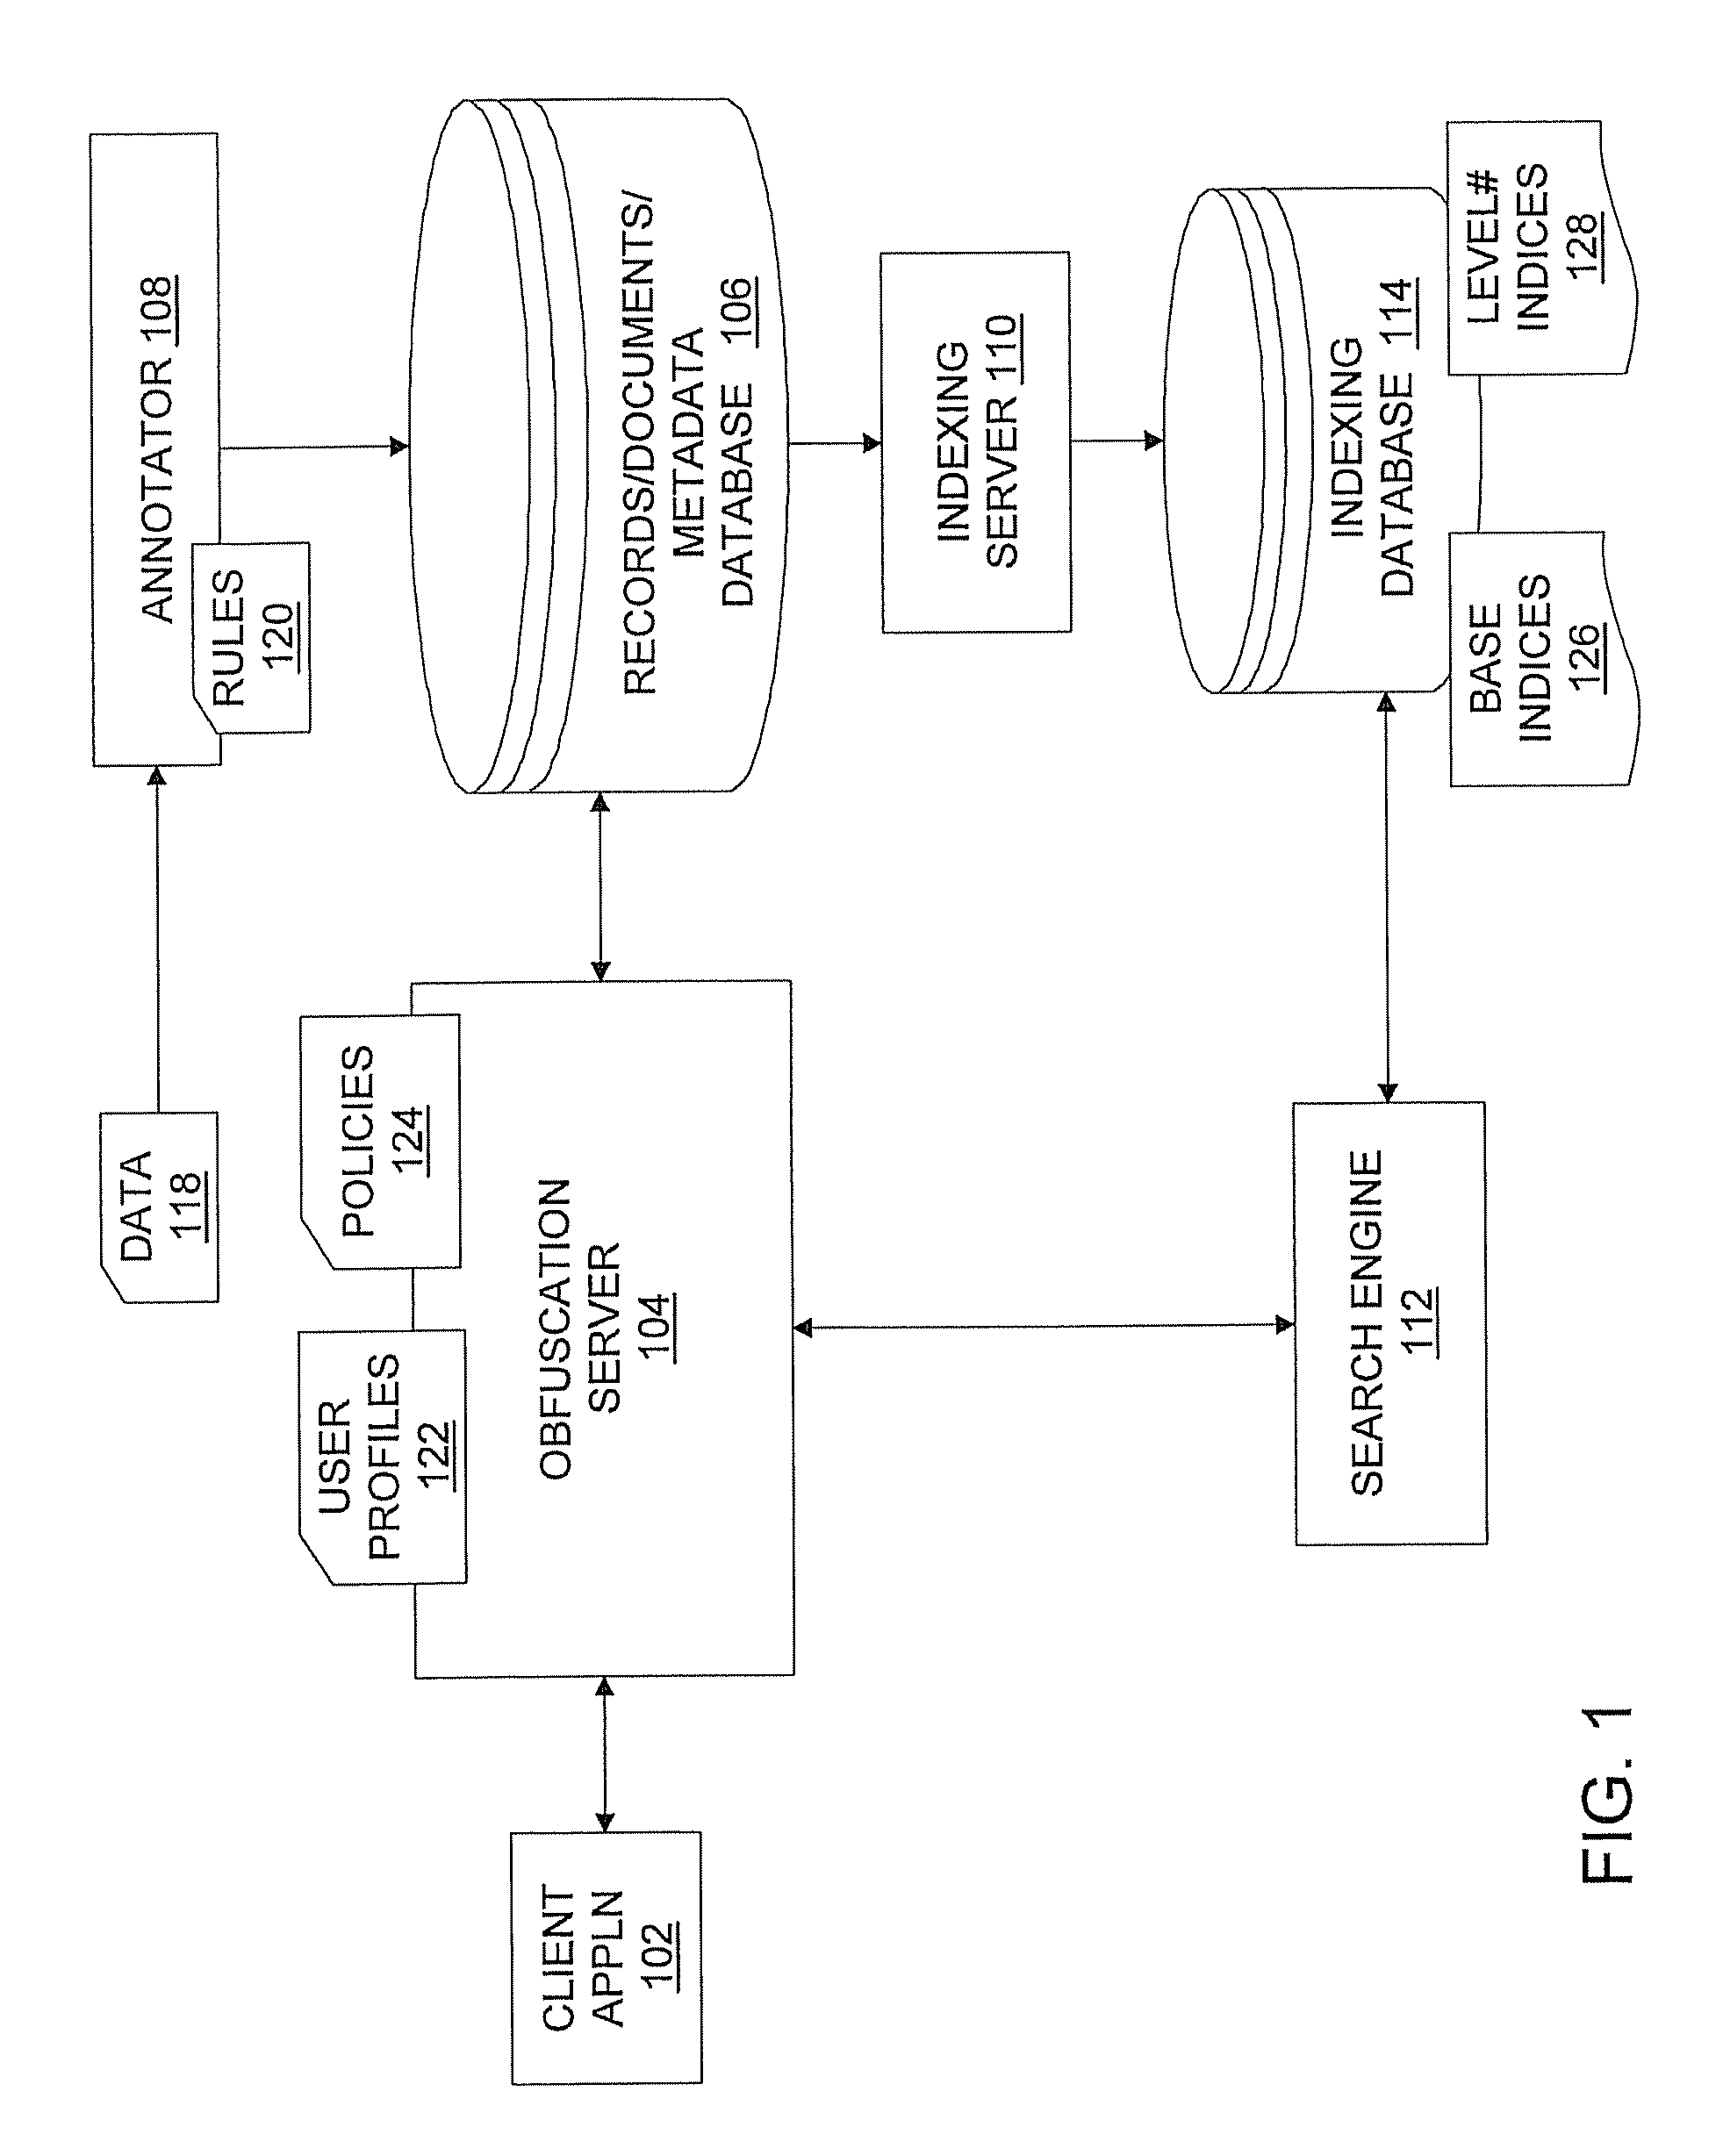 System, method, and computer program product for implementing search-and retrieval-compatible data obfuscation